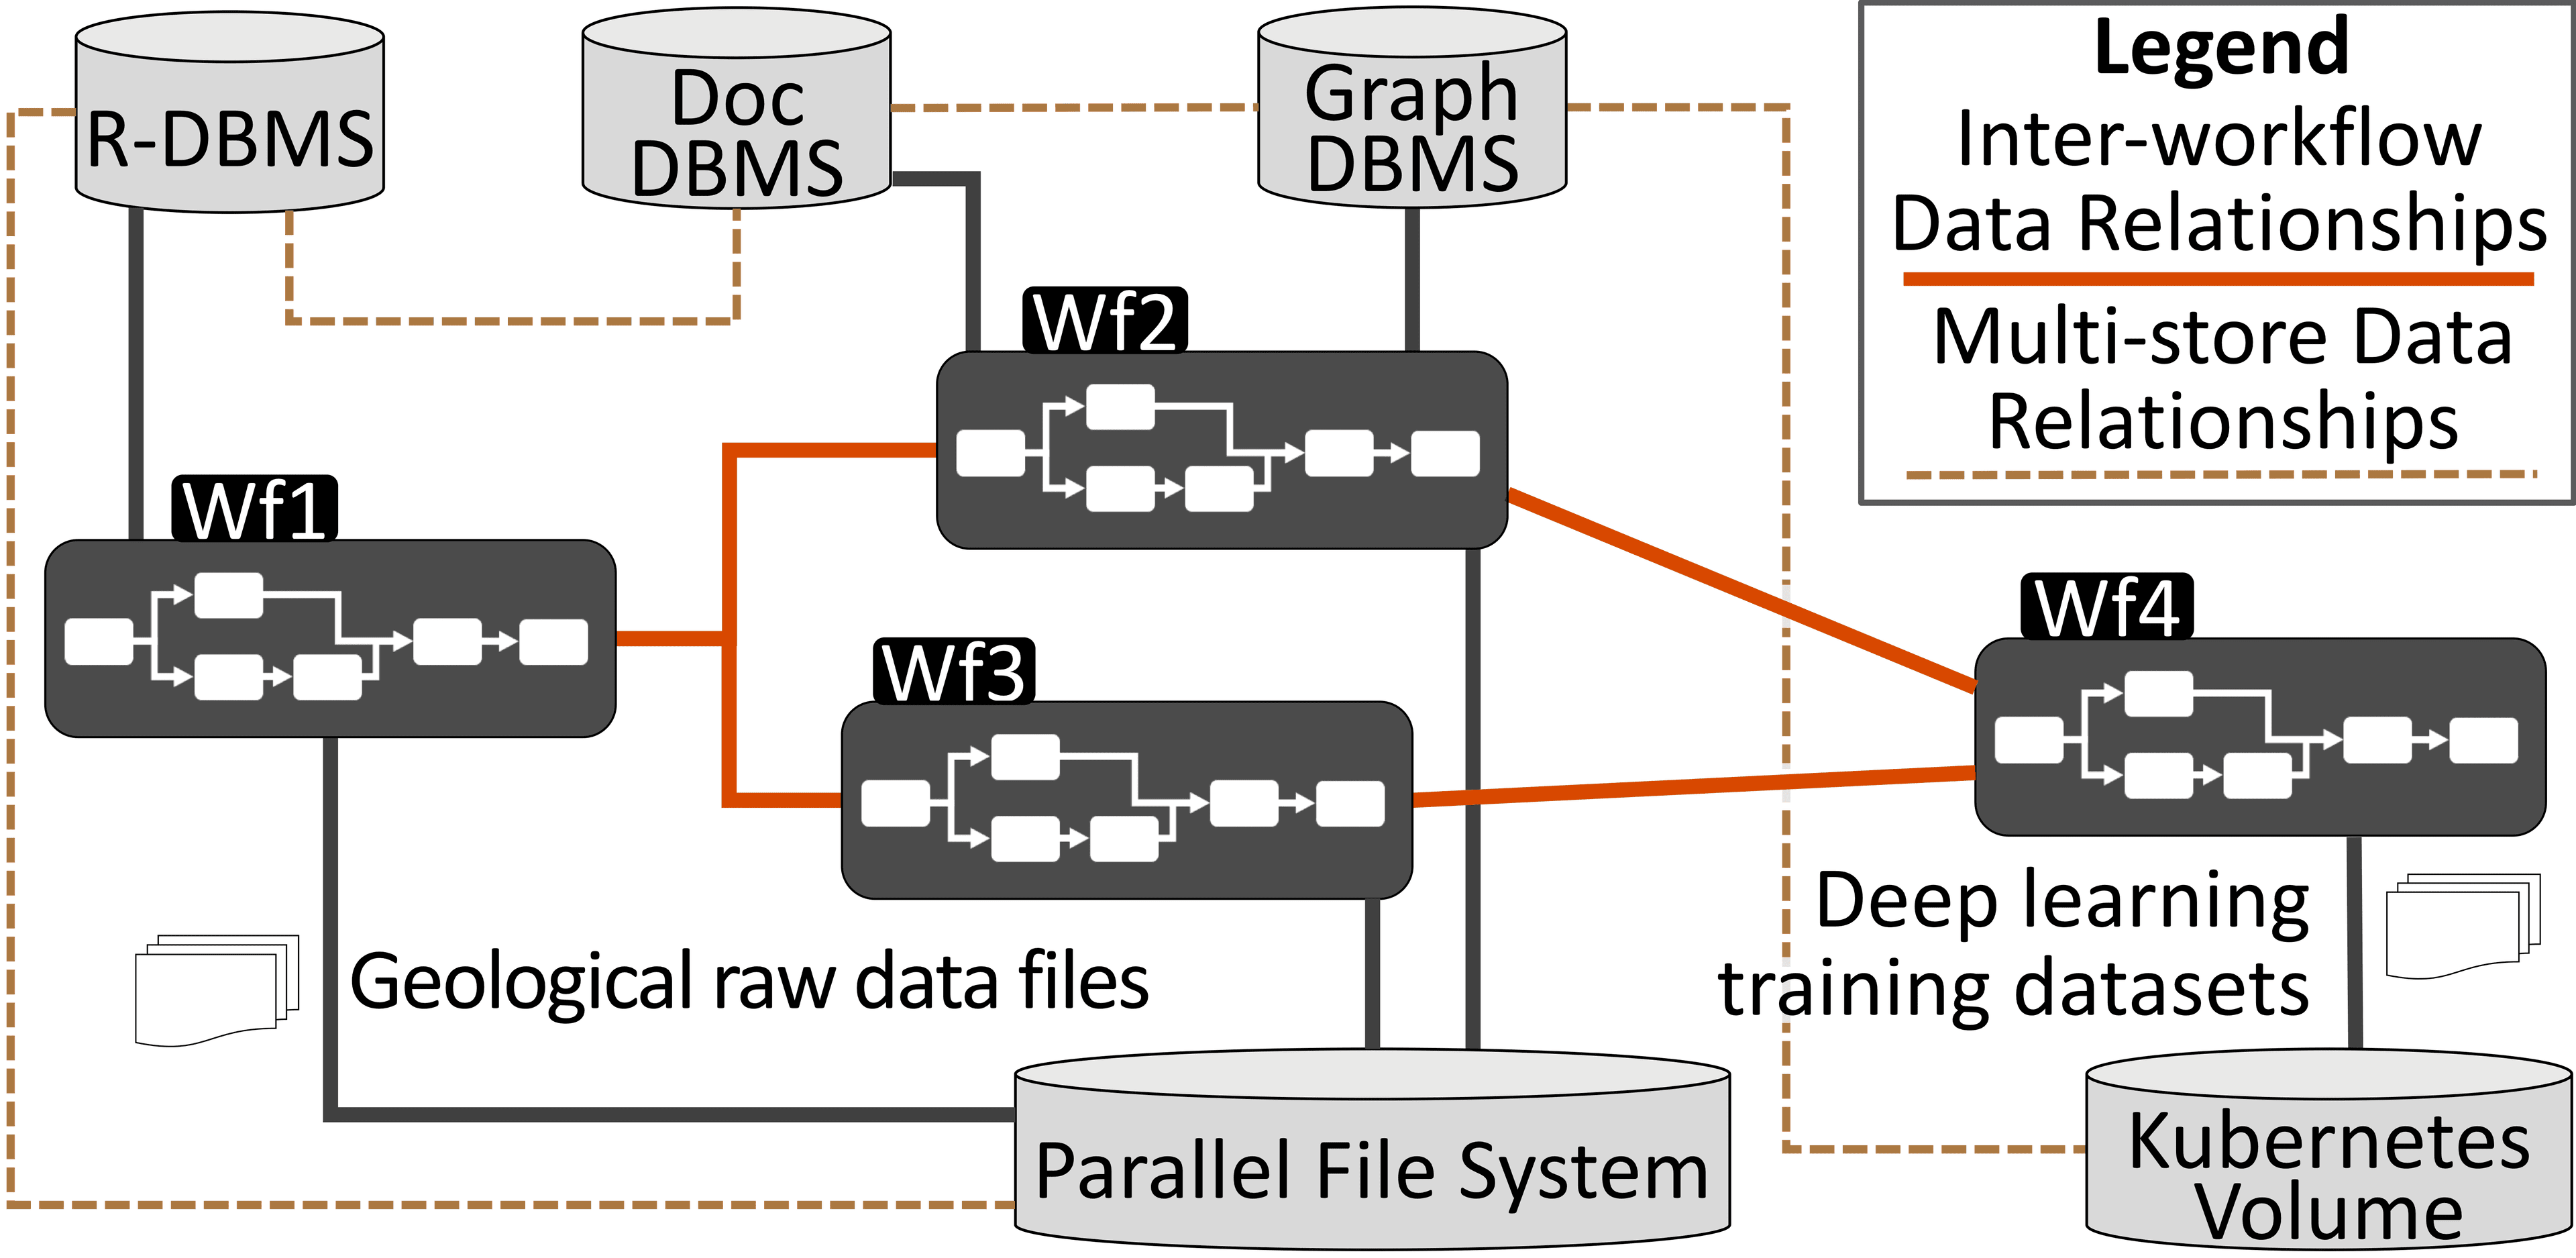 Architectural diagram of a multiworkflow use case